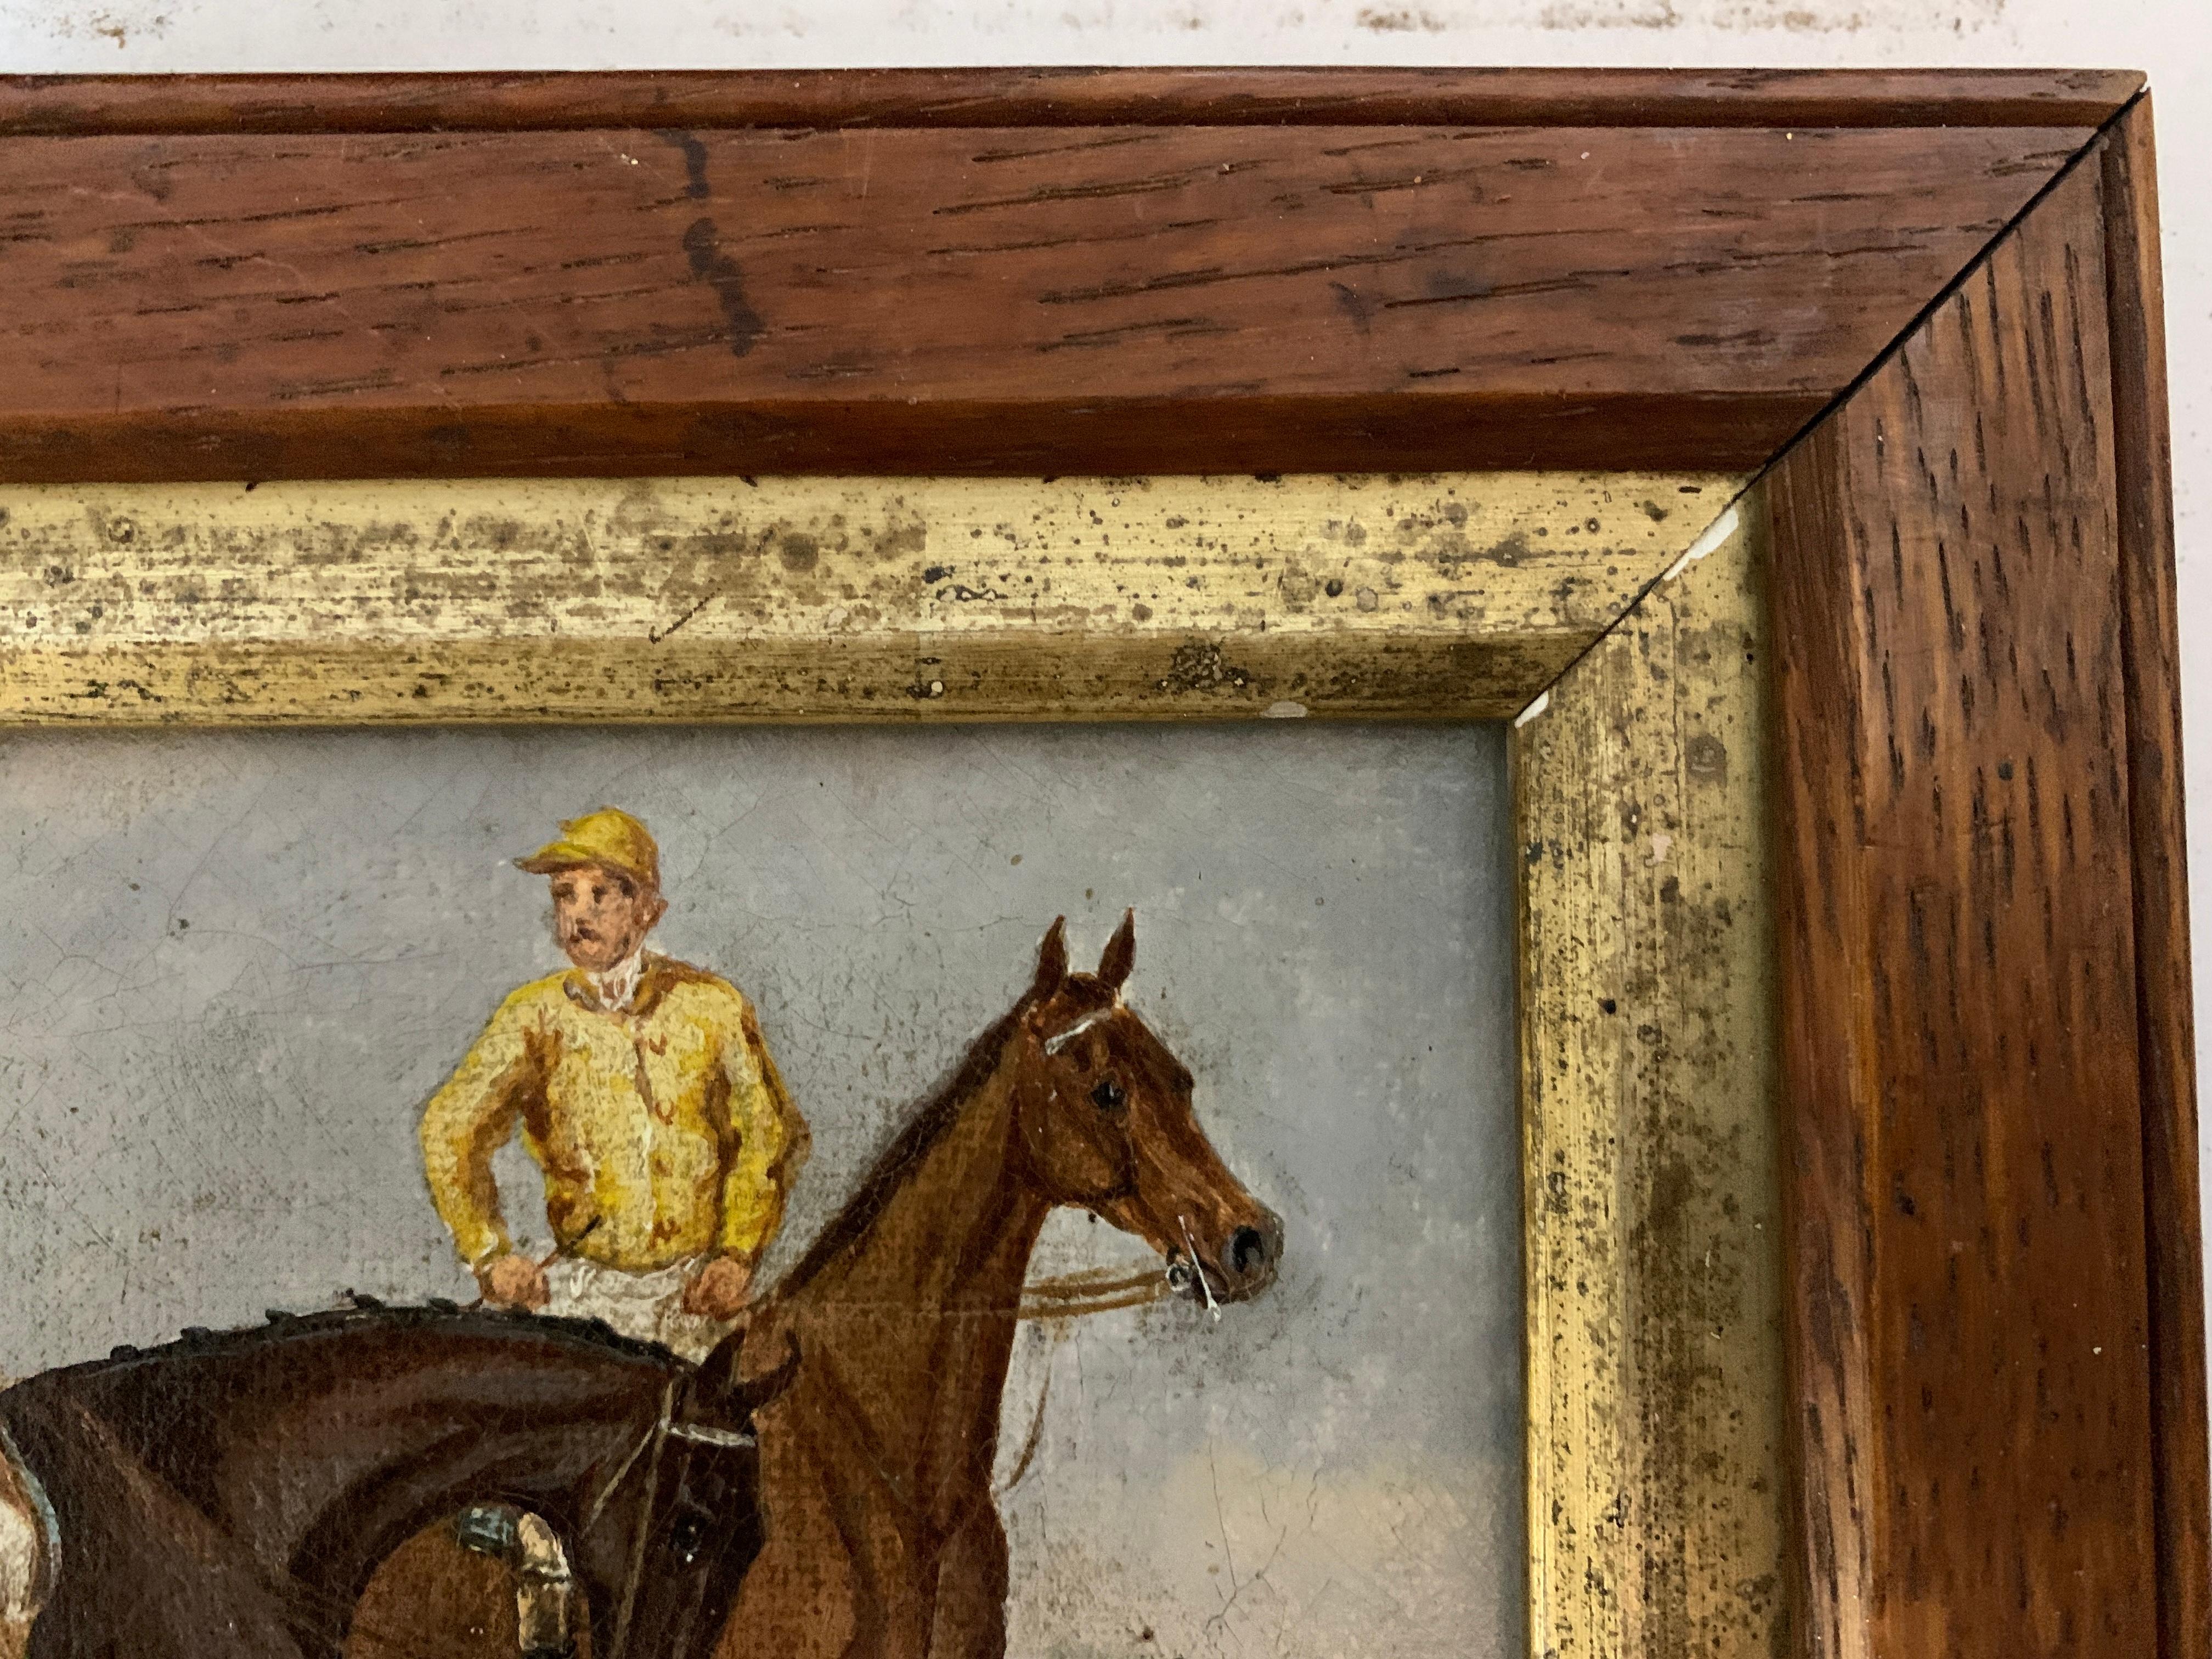 19th century English Horse racing scene with jockeys on horseback in a landscape.

The painting is inscribed along the inside canvas as to the owners of the horses and in this case, it's the Duke of Beaufort and the Marquis of Hastings.

The